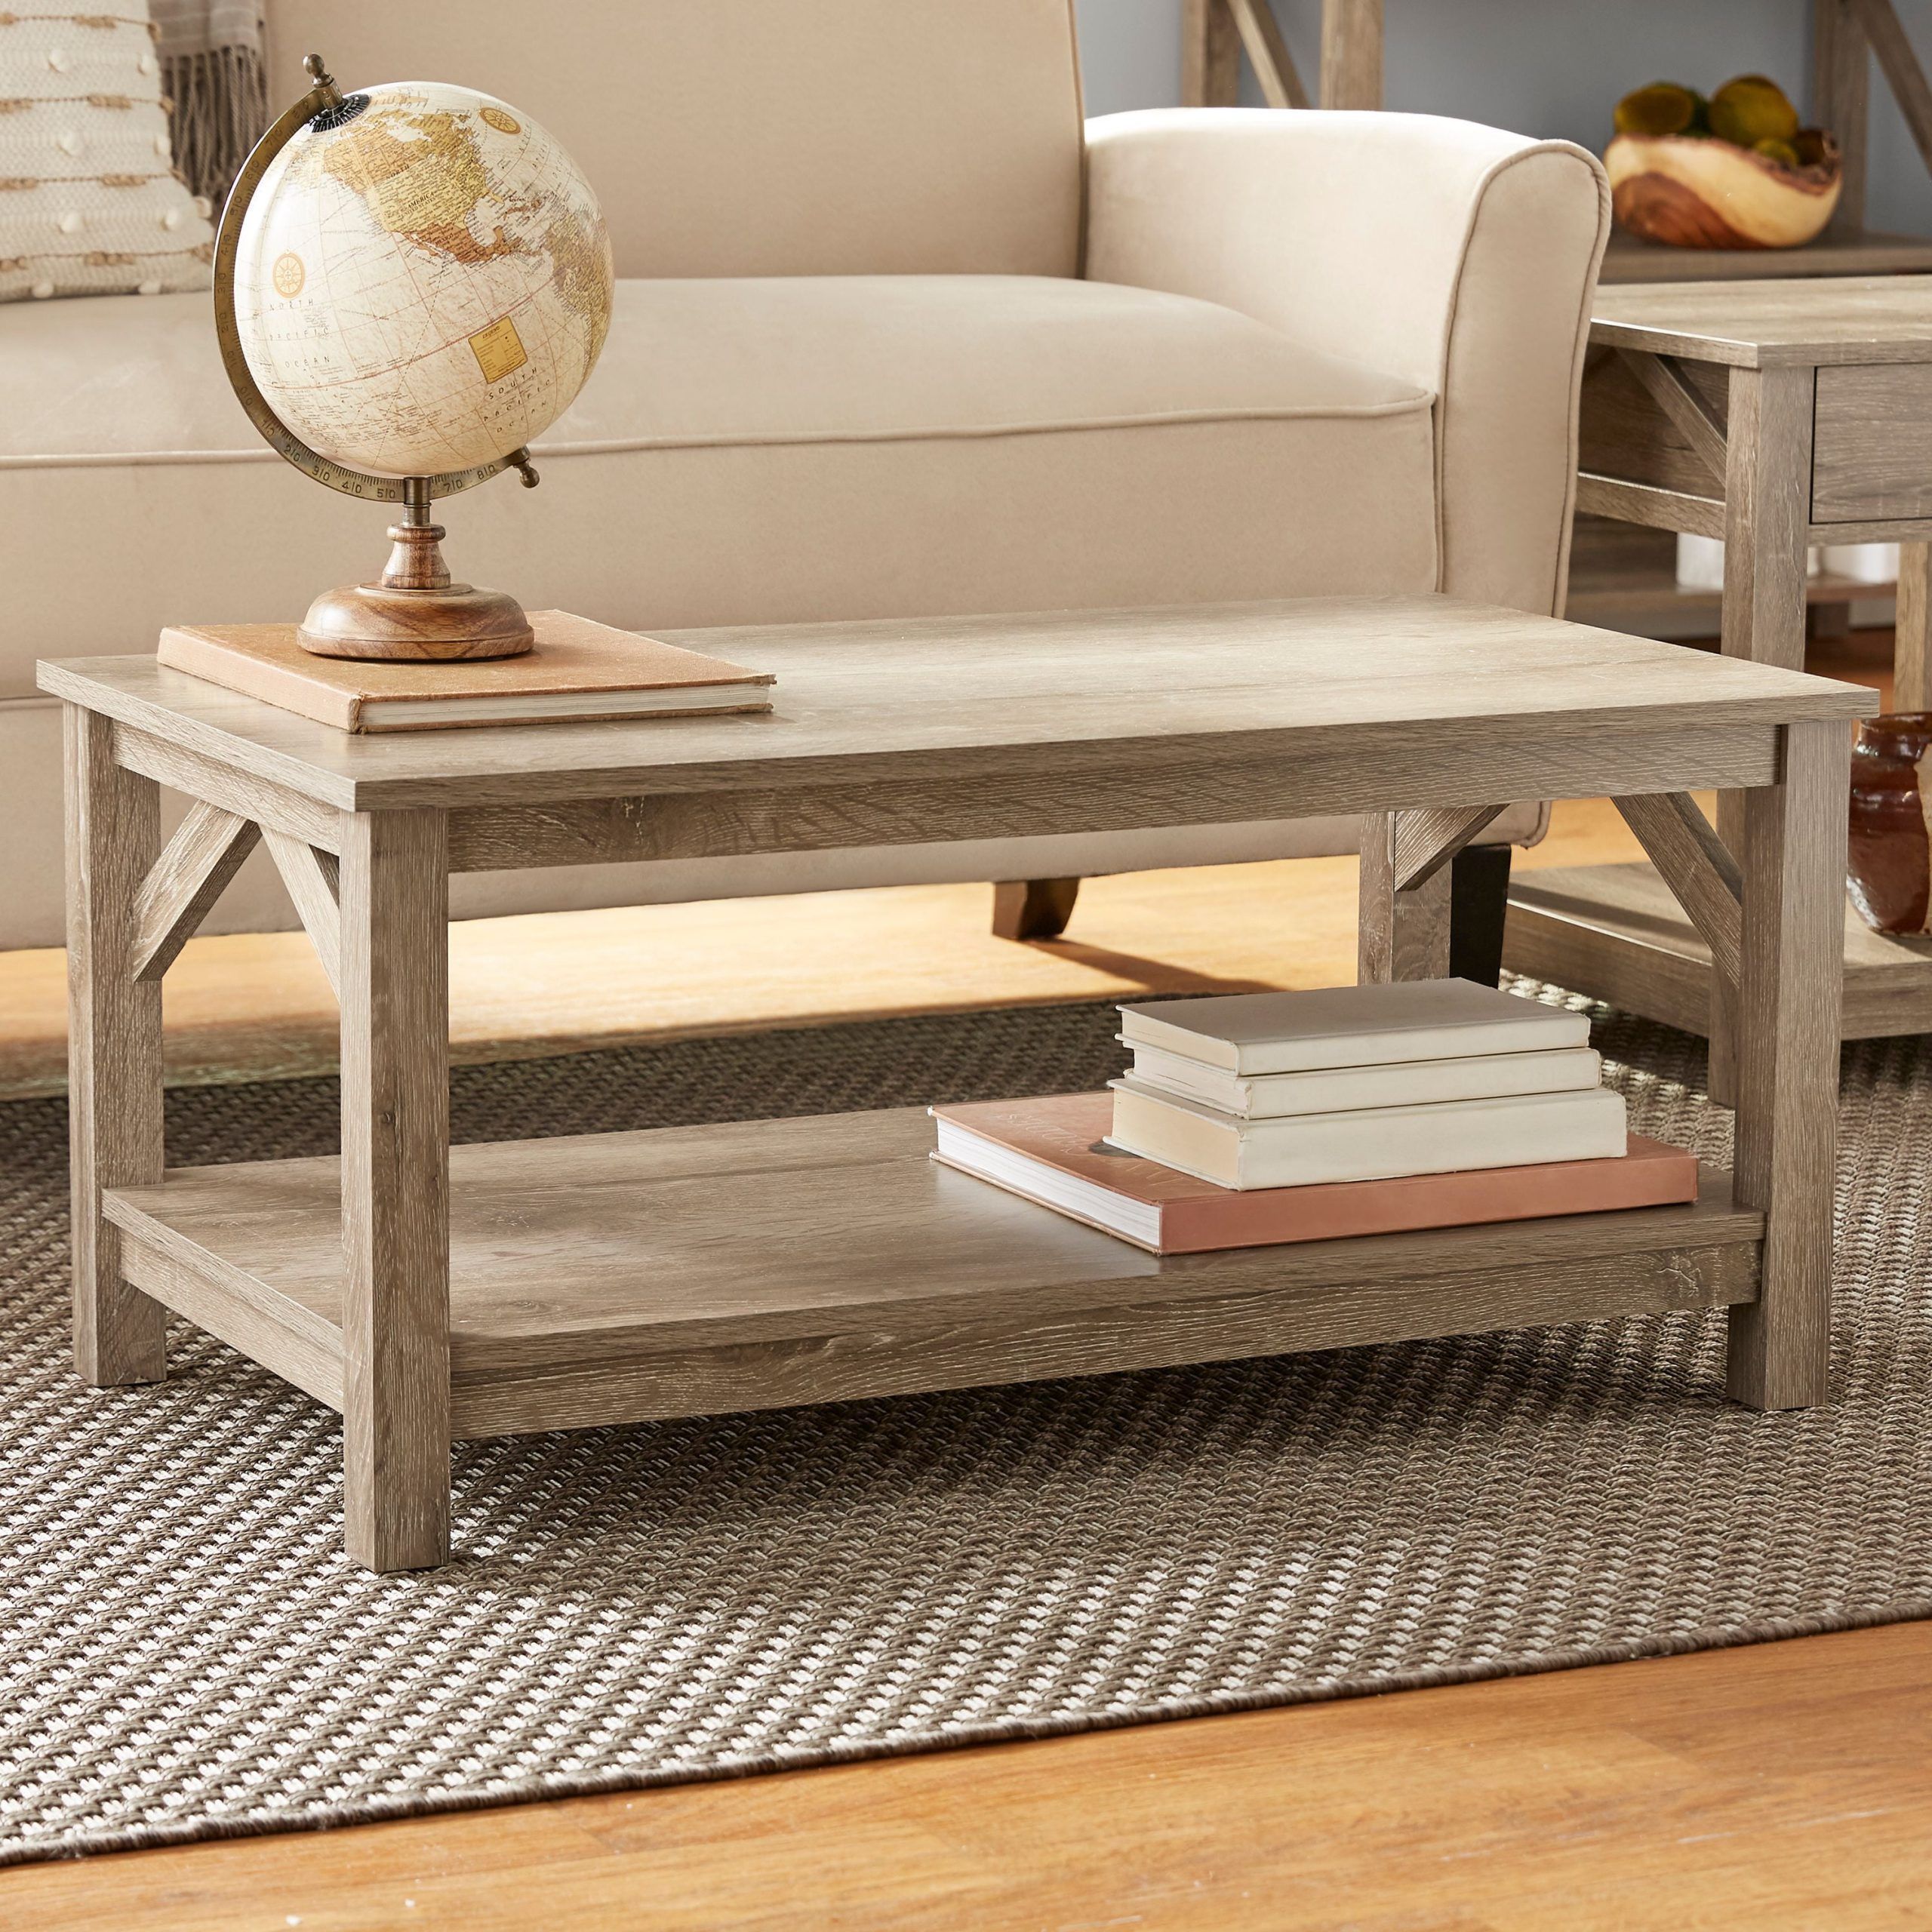 Mainstays Aston Mills Rustic Farmhouse Coffee Table, Rustic Brown Pertaining To Rustic Coffee Tables (Photo 2 of 15)